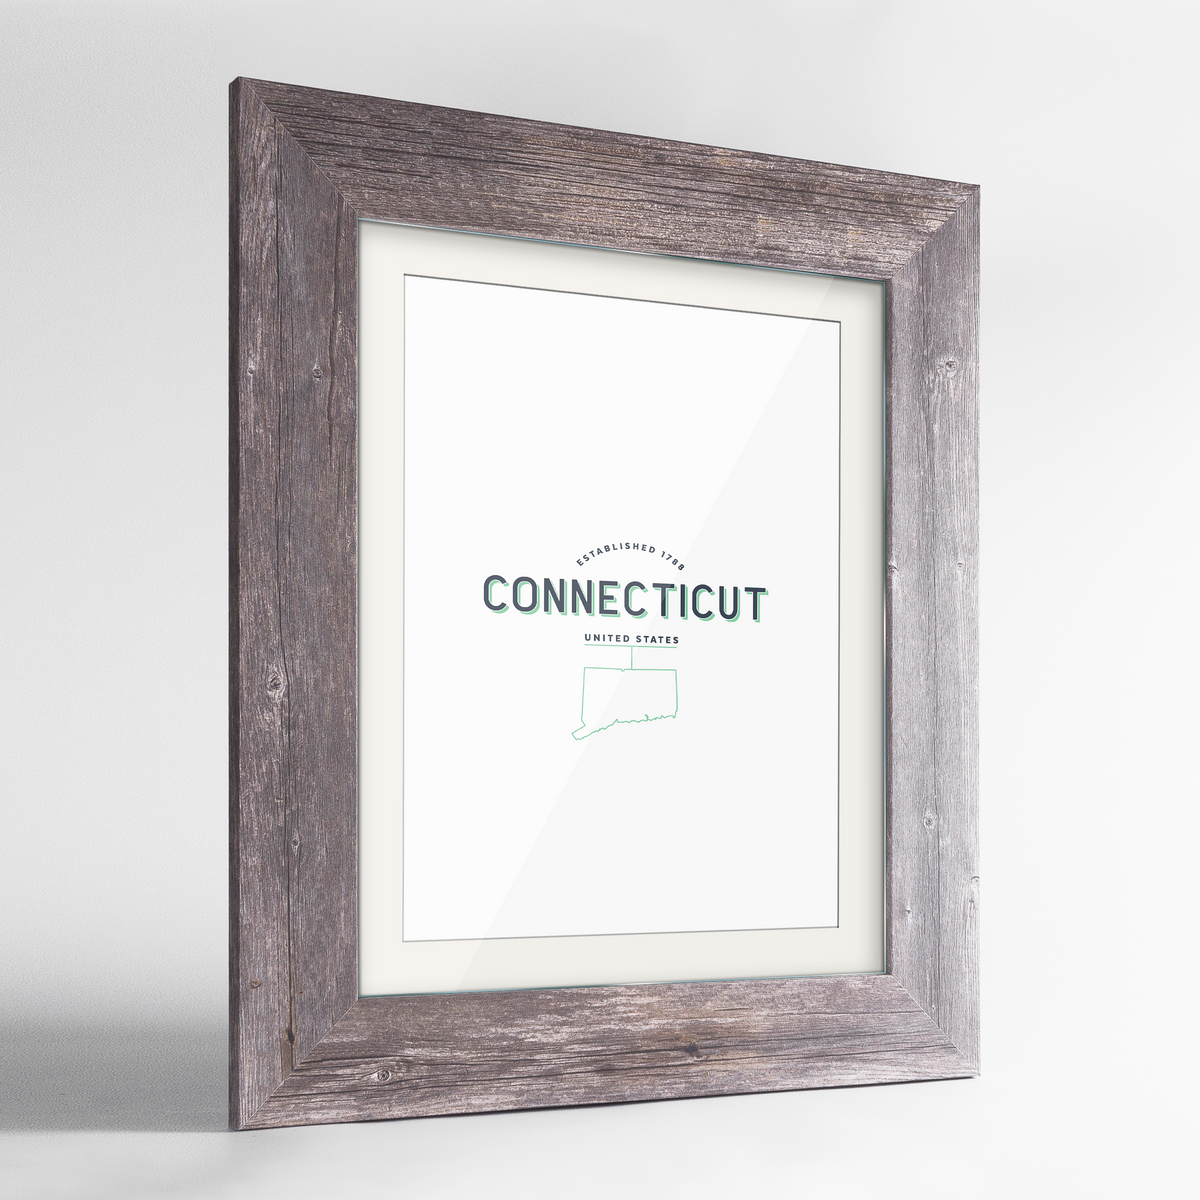 Connecticut Word Art Frame Print - State Line